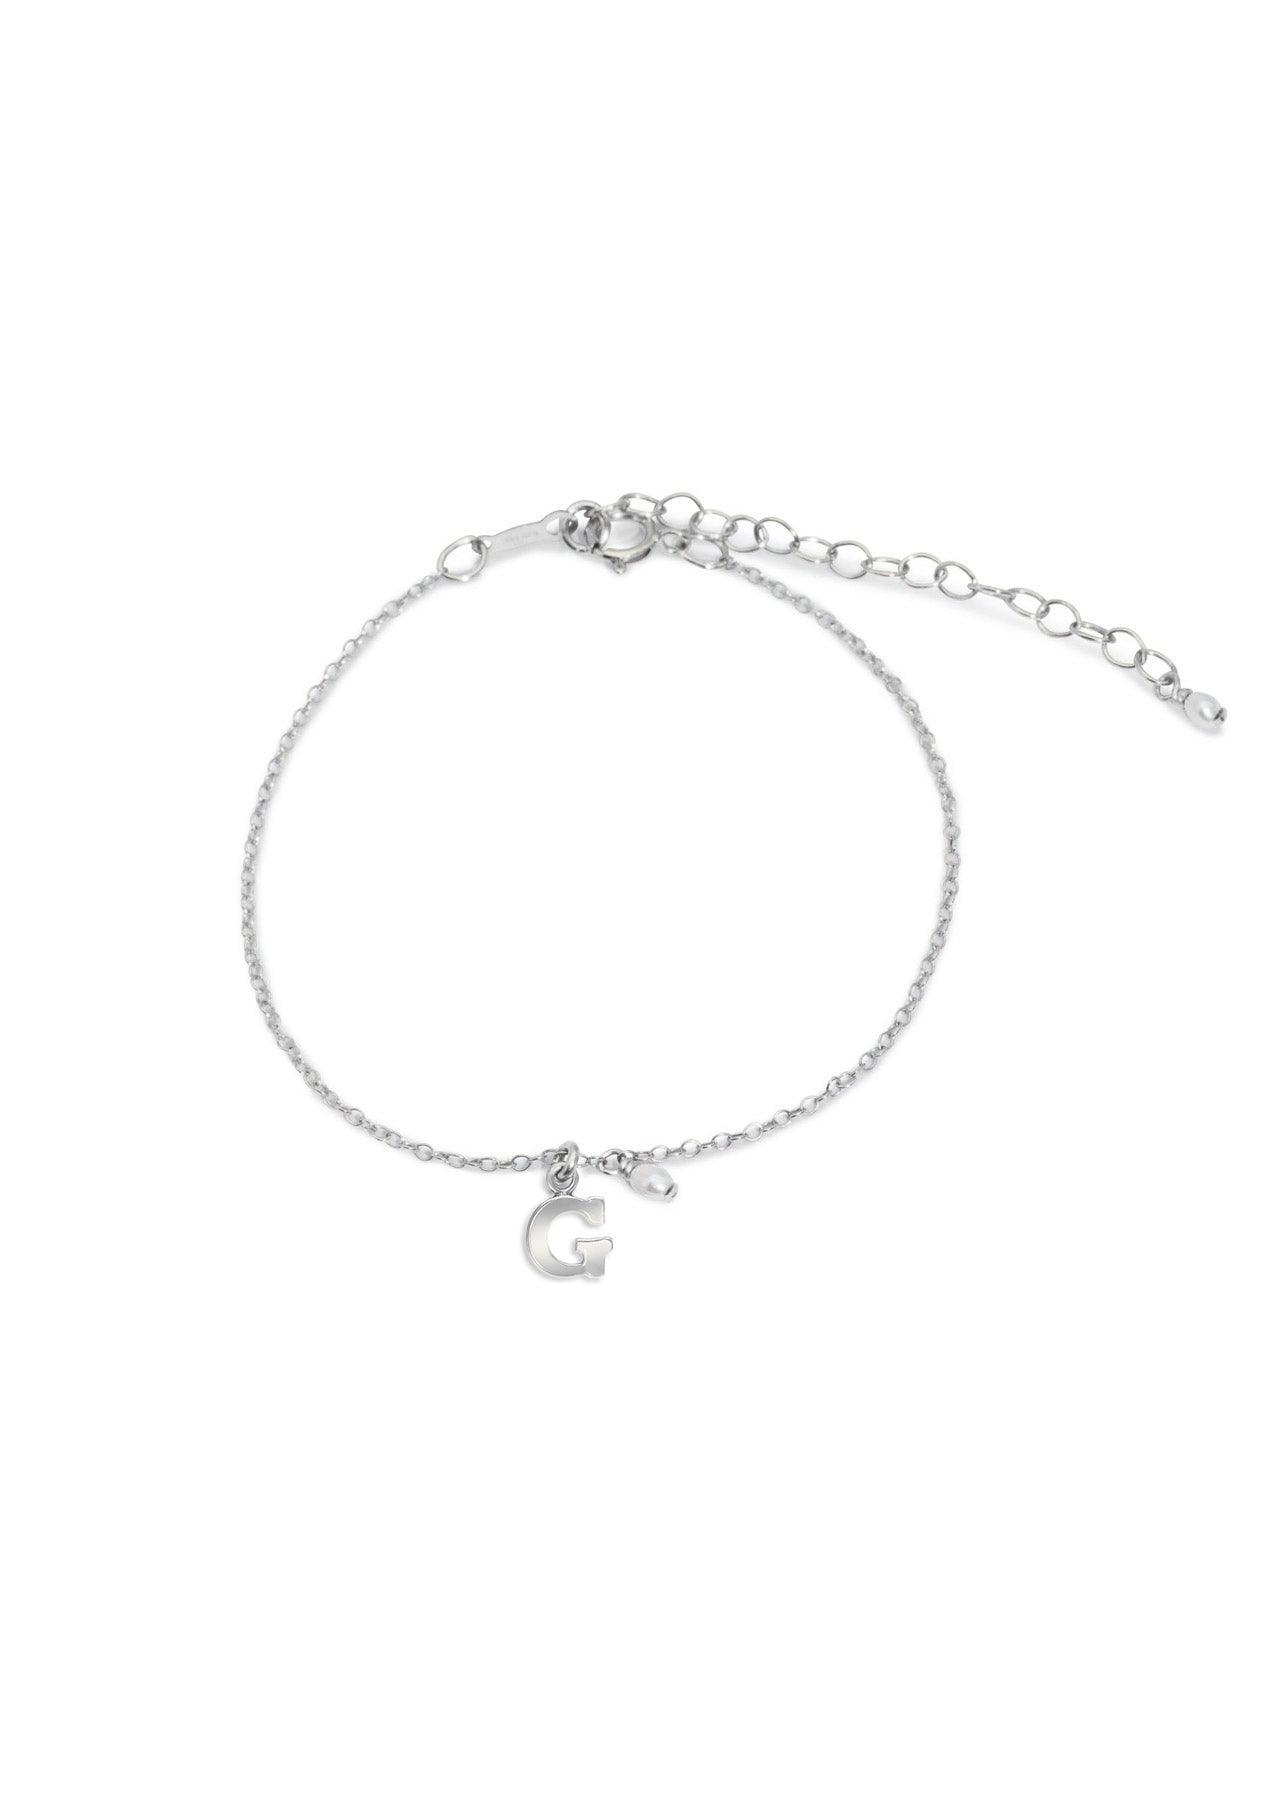 The Silver Initial Charm Bracelet